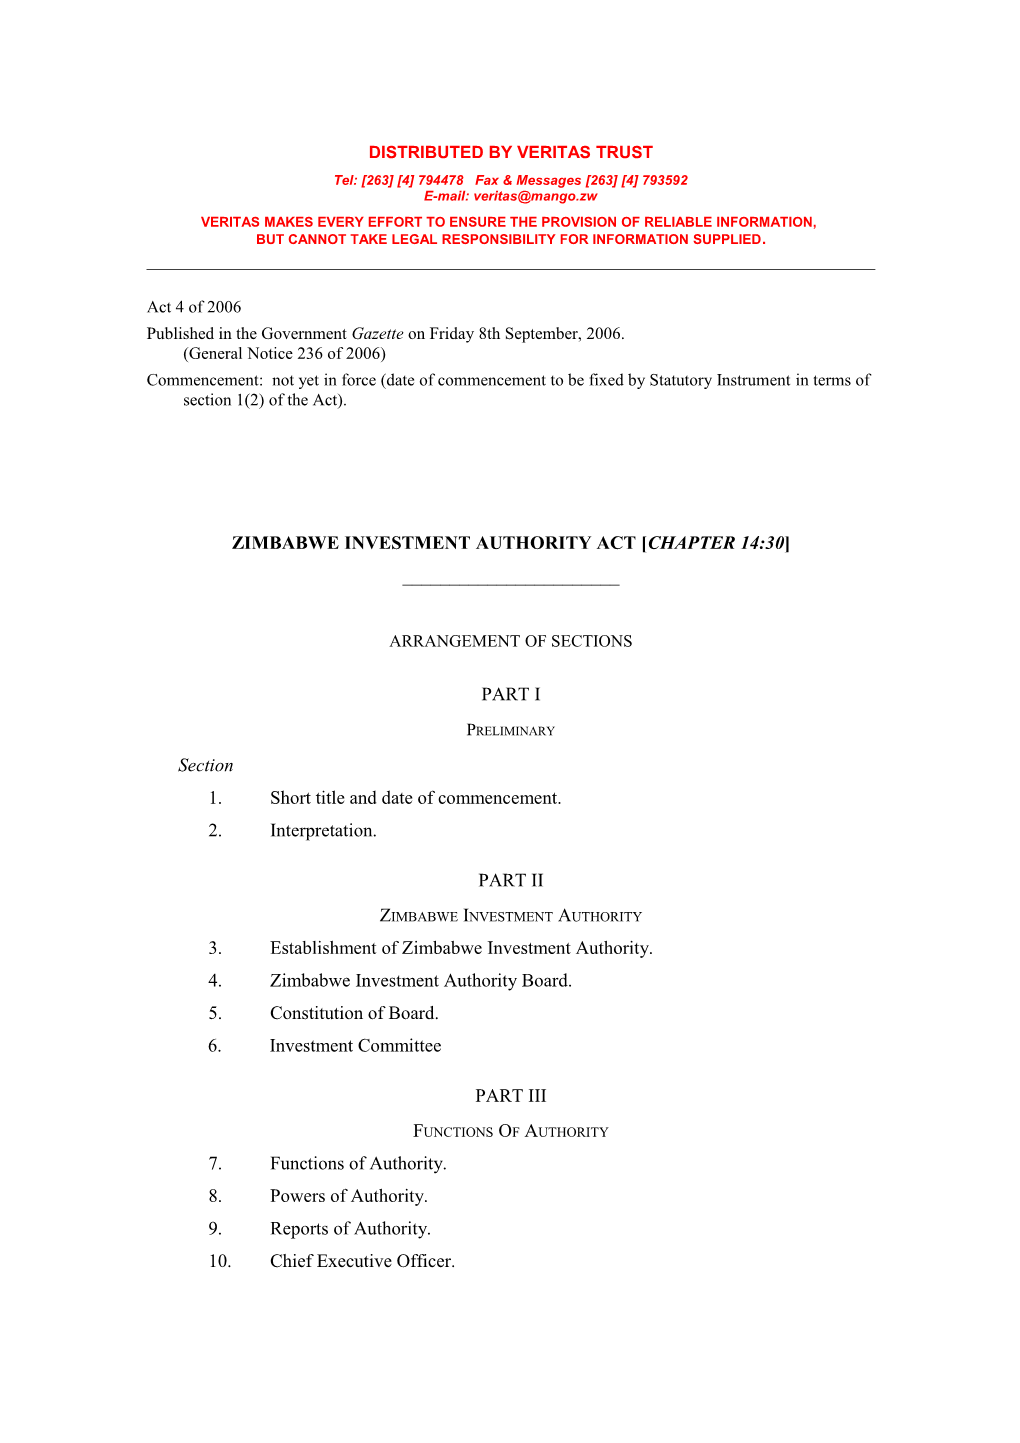 Zimbabwe Investment Authority Act Chapter 14:30 - Act 4 of 2006 10-2005